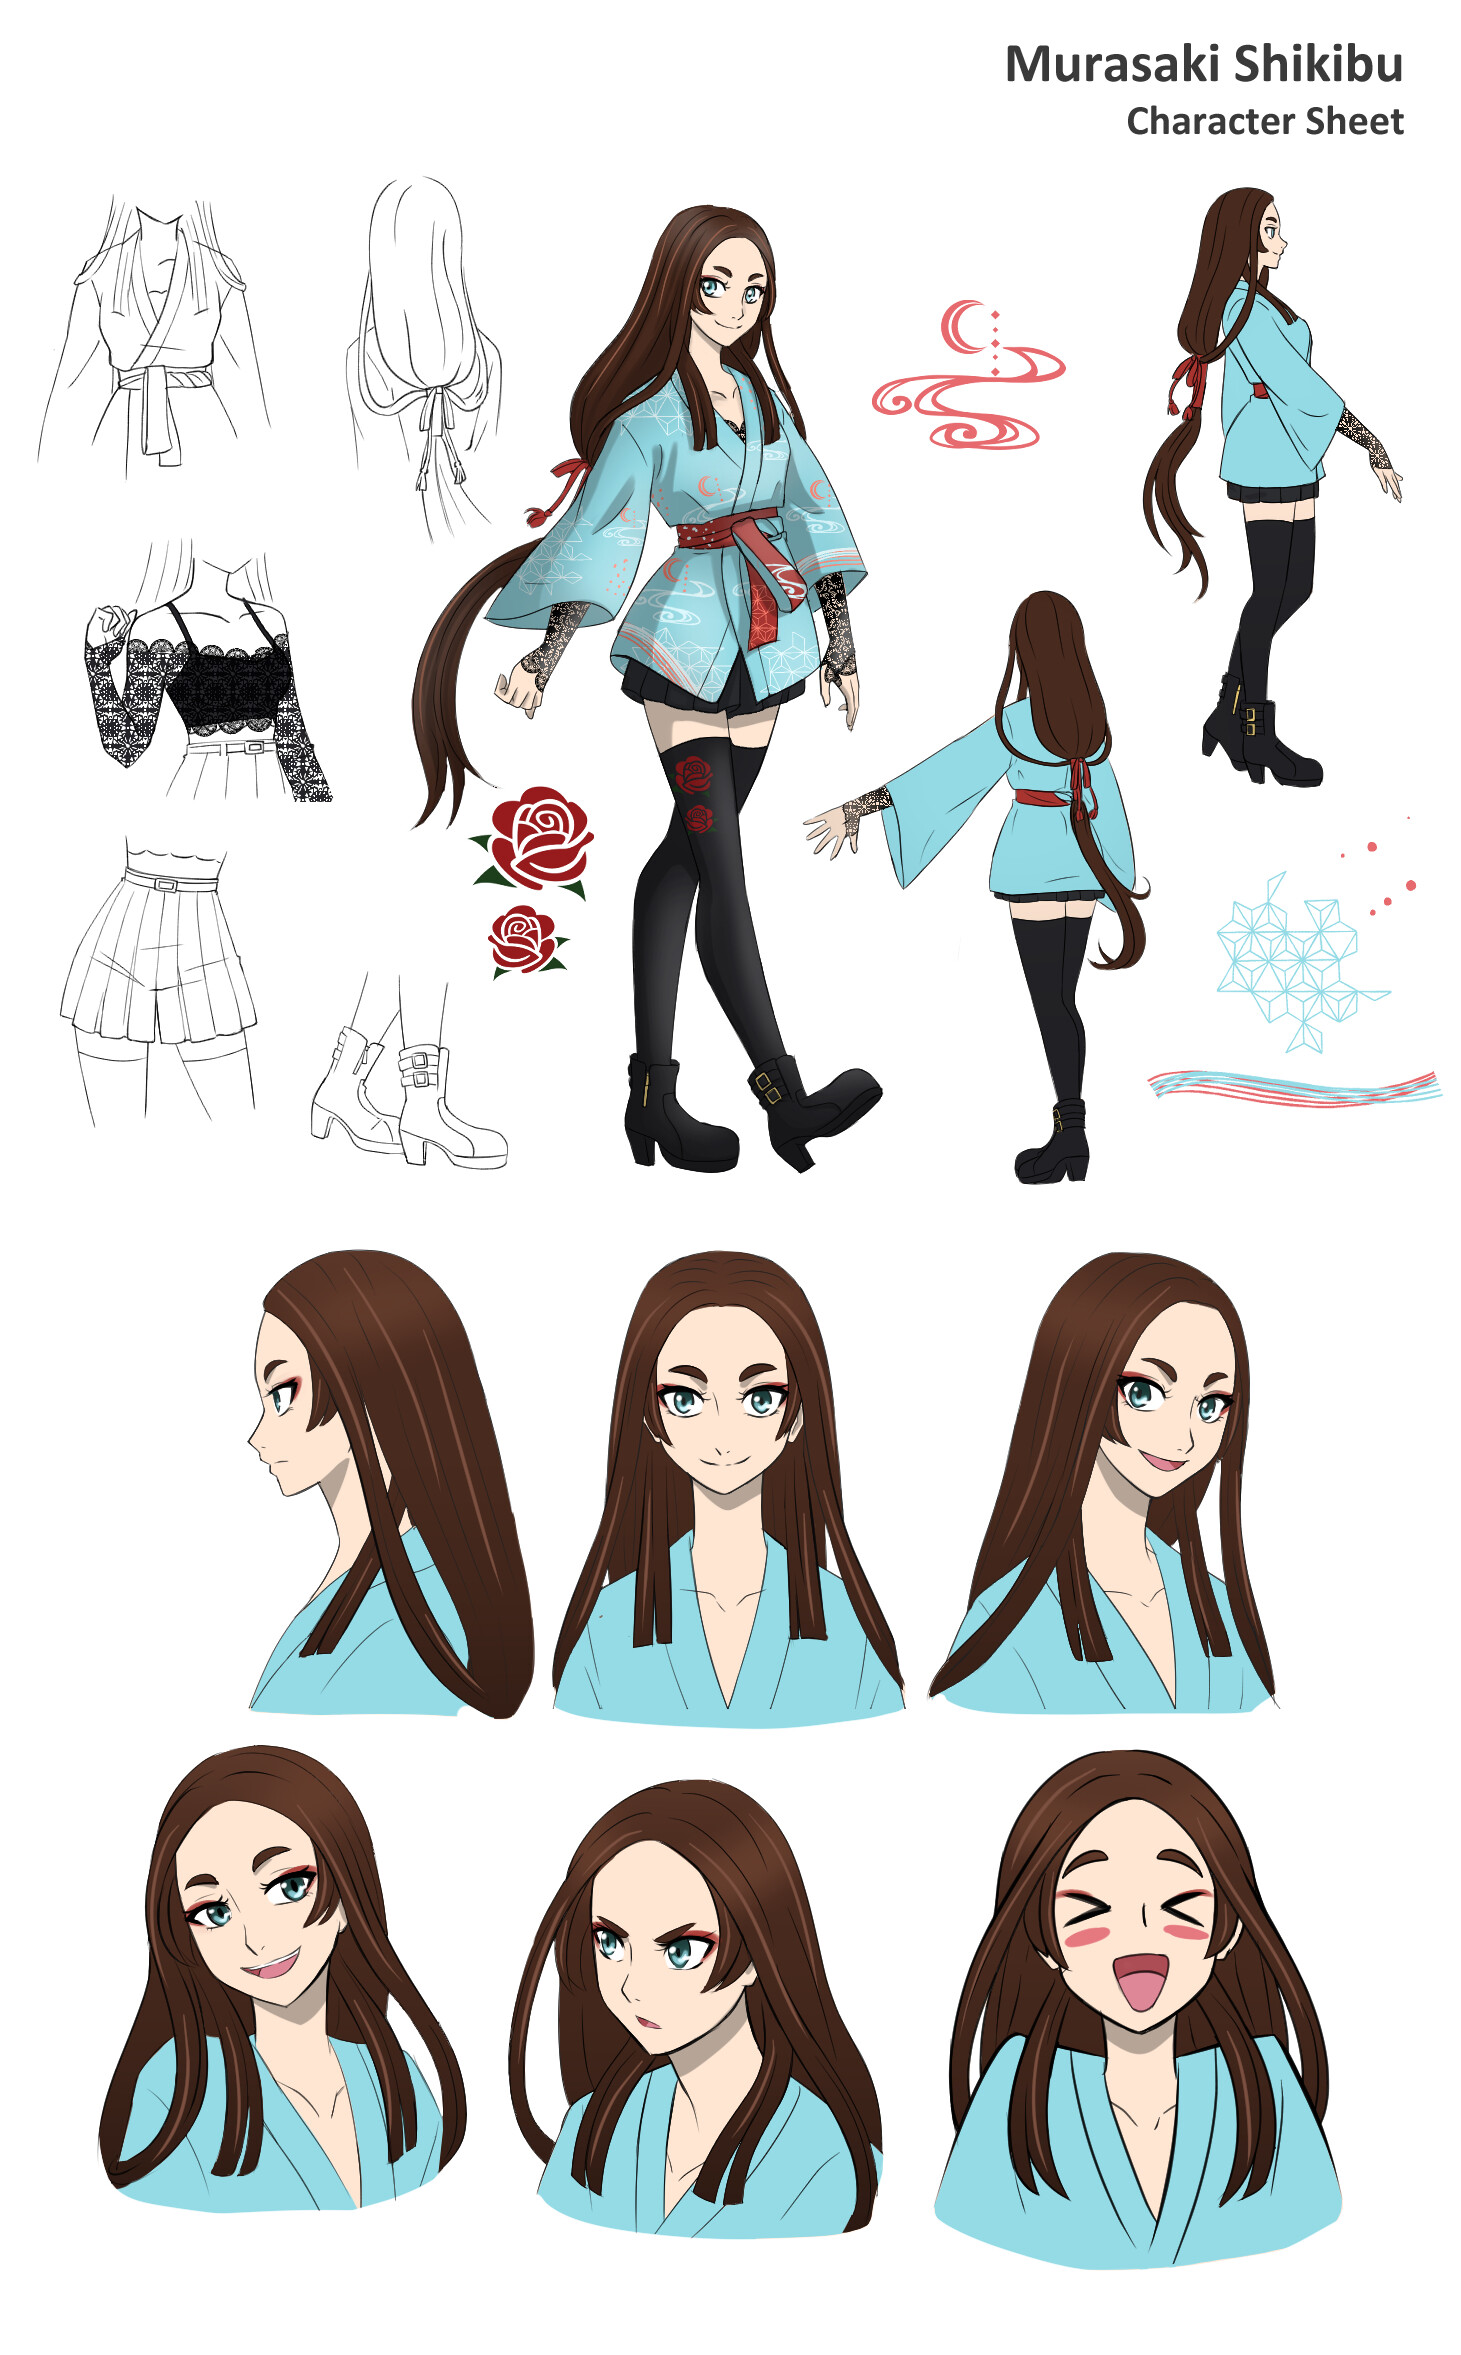 Character Sheet Anime Style  ArtistsClients